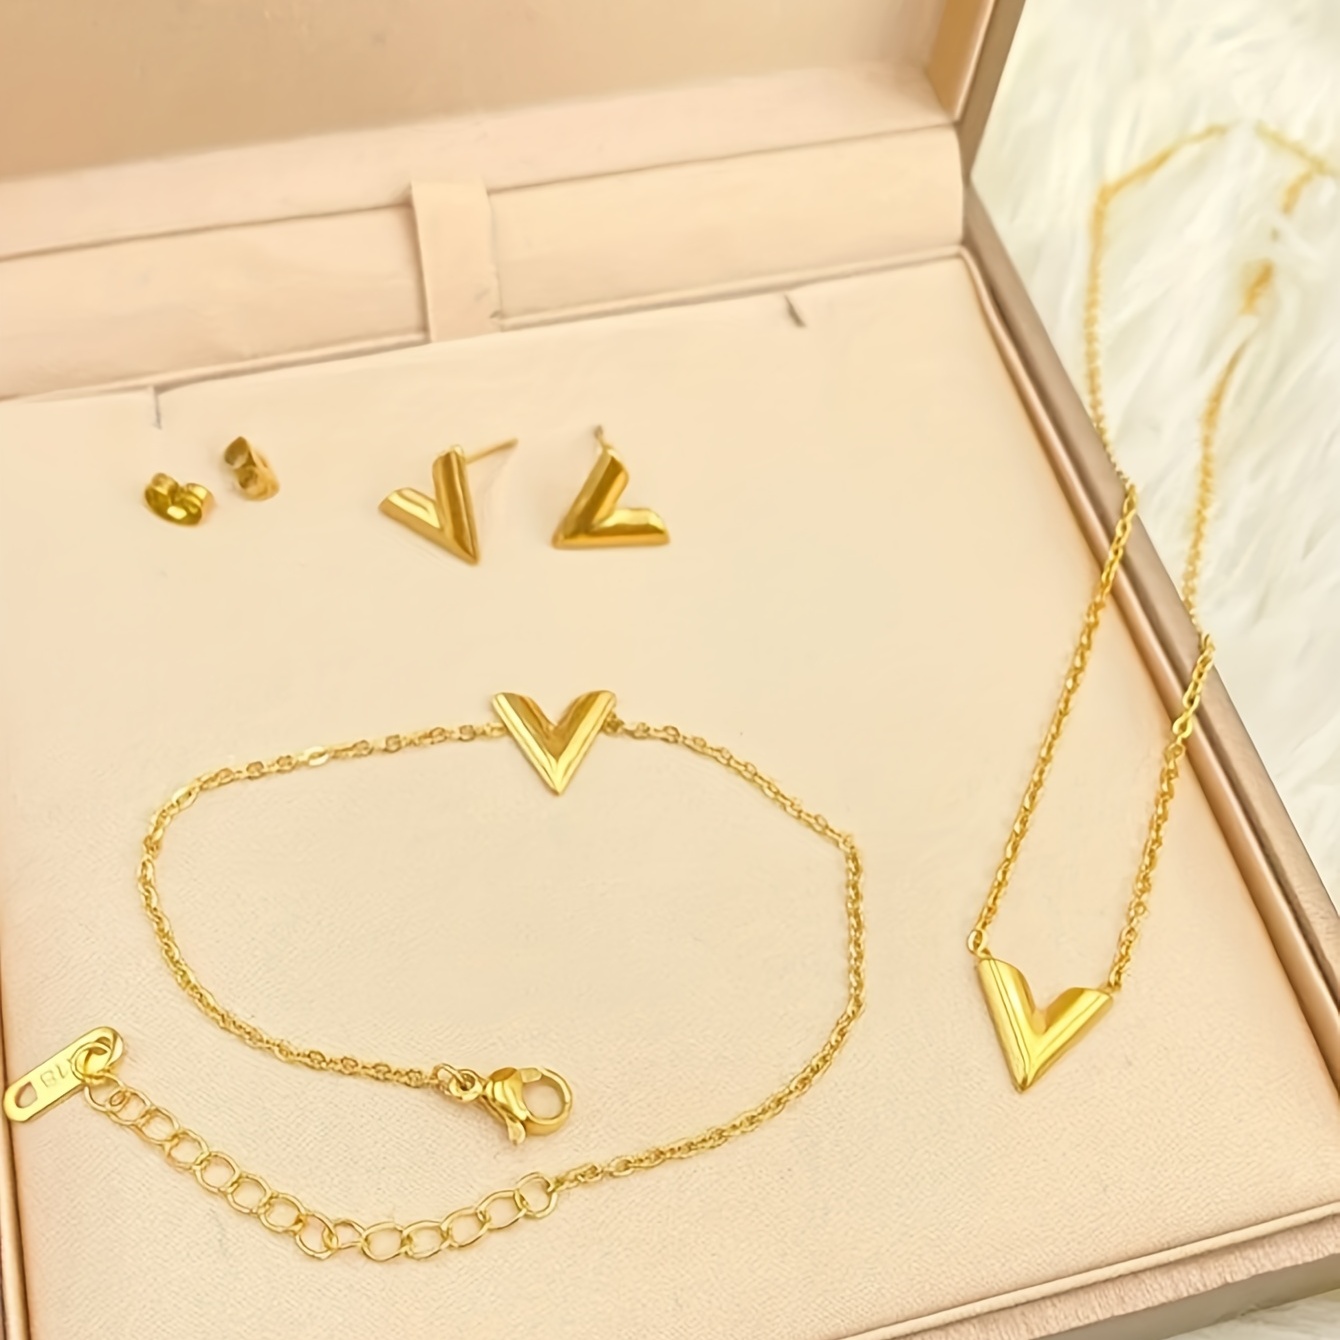 LV HIGH QUALITY STAINLESS STEEL JEWELRY SET(EARINGS-NECKLACE-BRACELET)